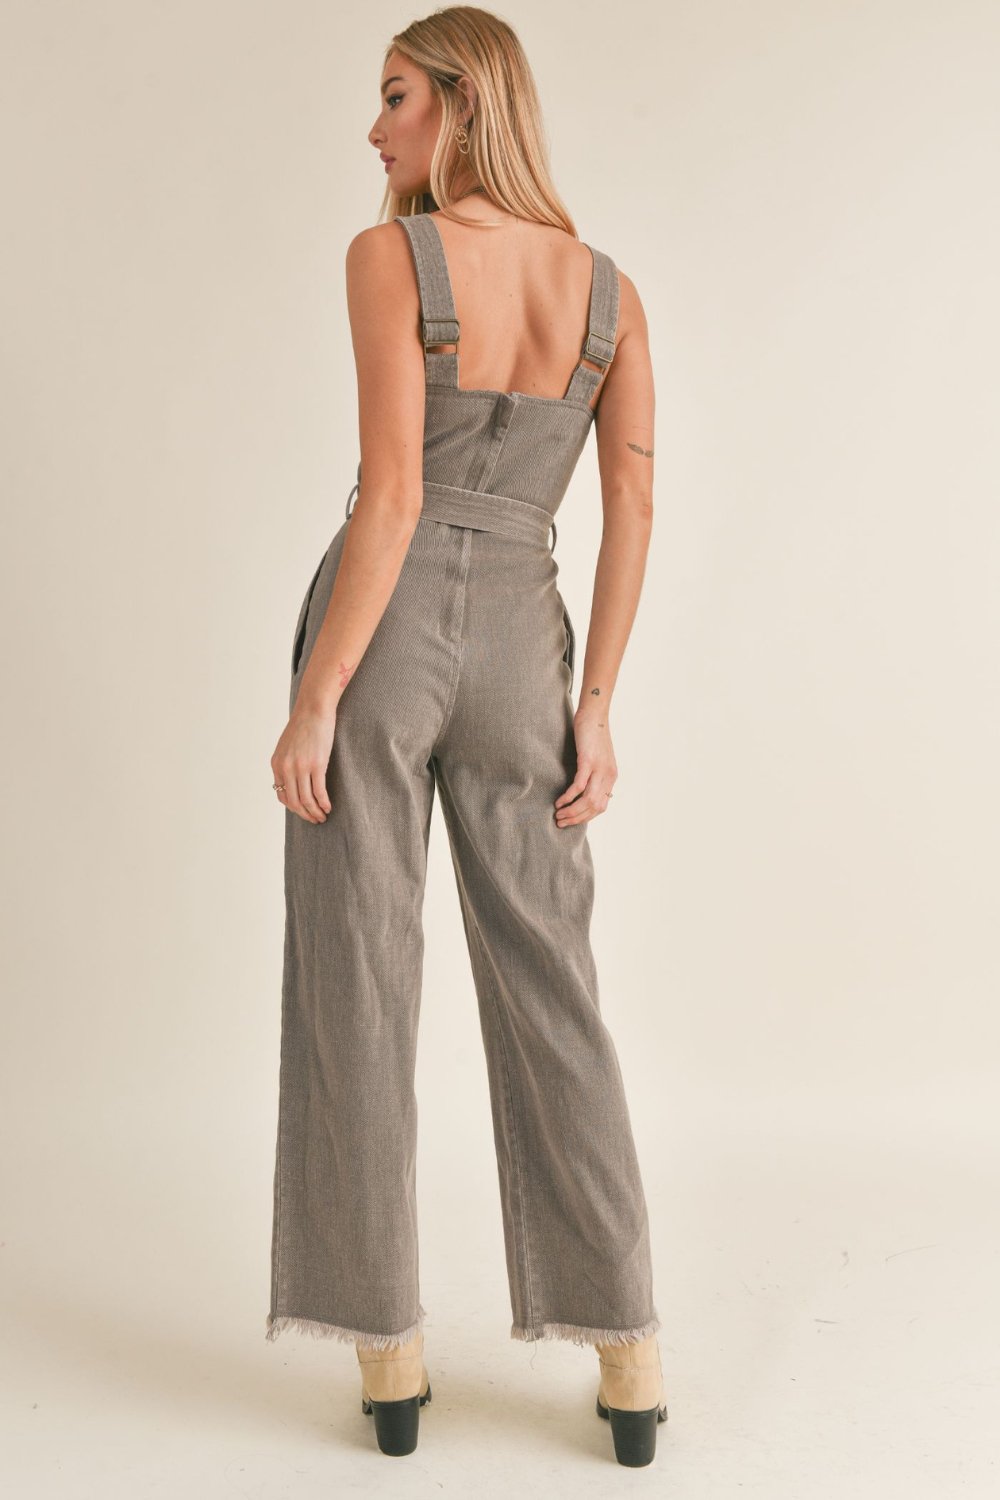 Women&#39;s Cotton Denim Overalls | Belted Jumpsuit | Charcoal Brown - Women&#39;s Jumpsuit - Blooming Daily